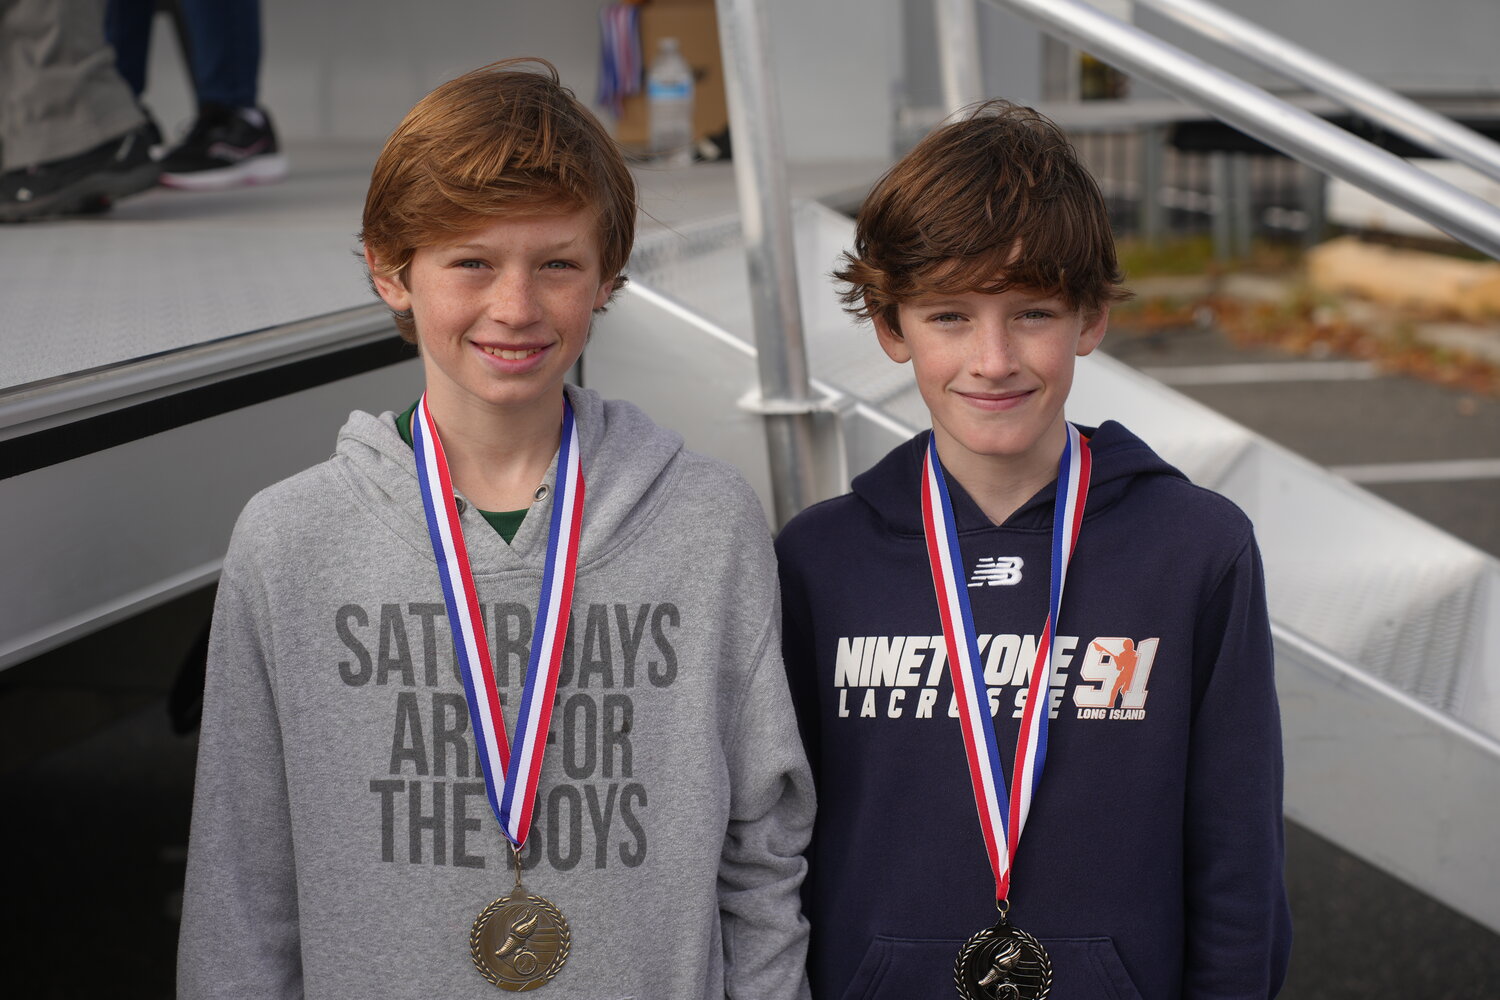 Quinn Flatley, 13, and Connor Flately, 11, were presented with medals for finishing in first- and second-place in the boys’ 14 and under division.